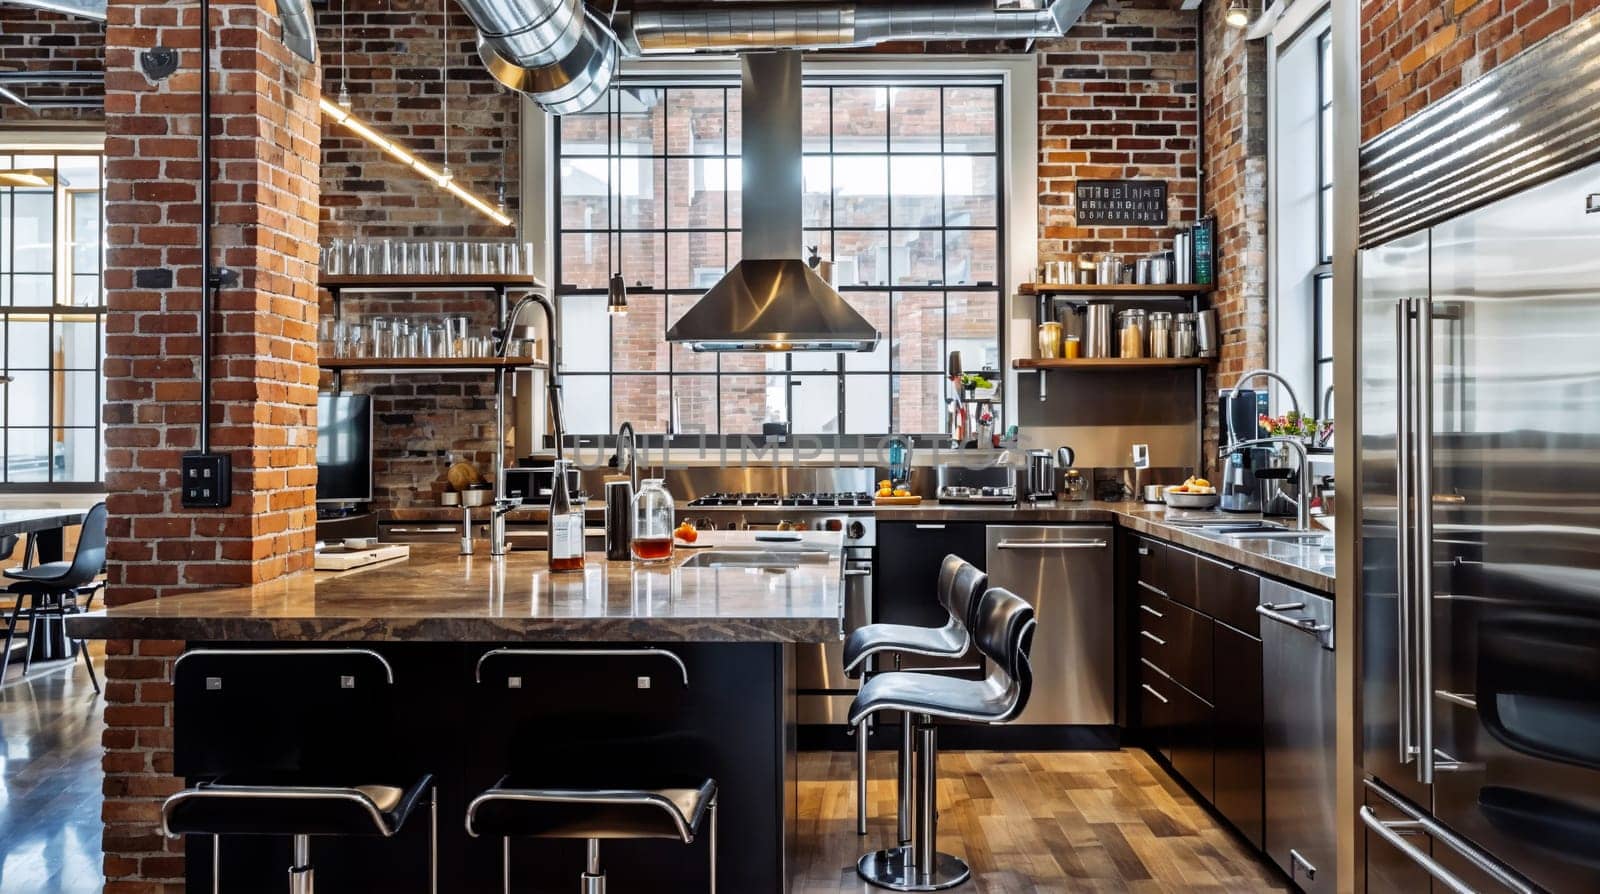 contemporary kitchen design featuring exposed brick walls, sleek black cabinetry, a large island with seating, and industrial-style lighting elements in a brightly lit urban setting - Generative AI